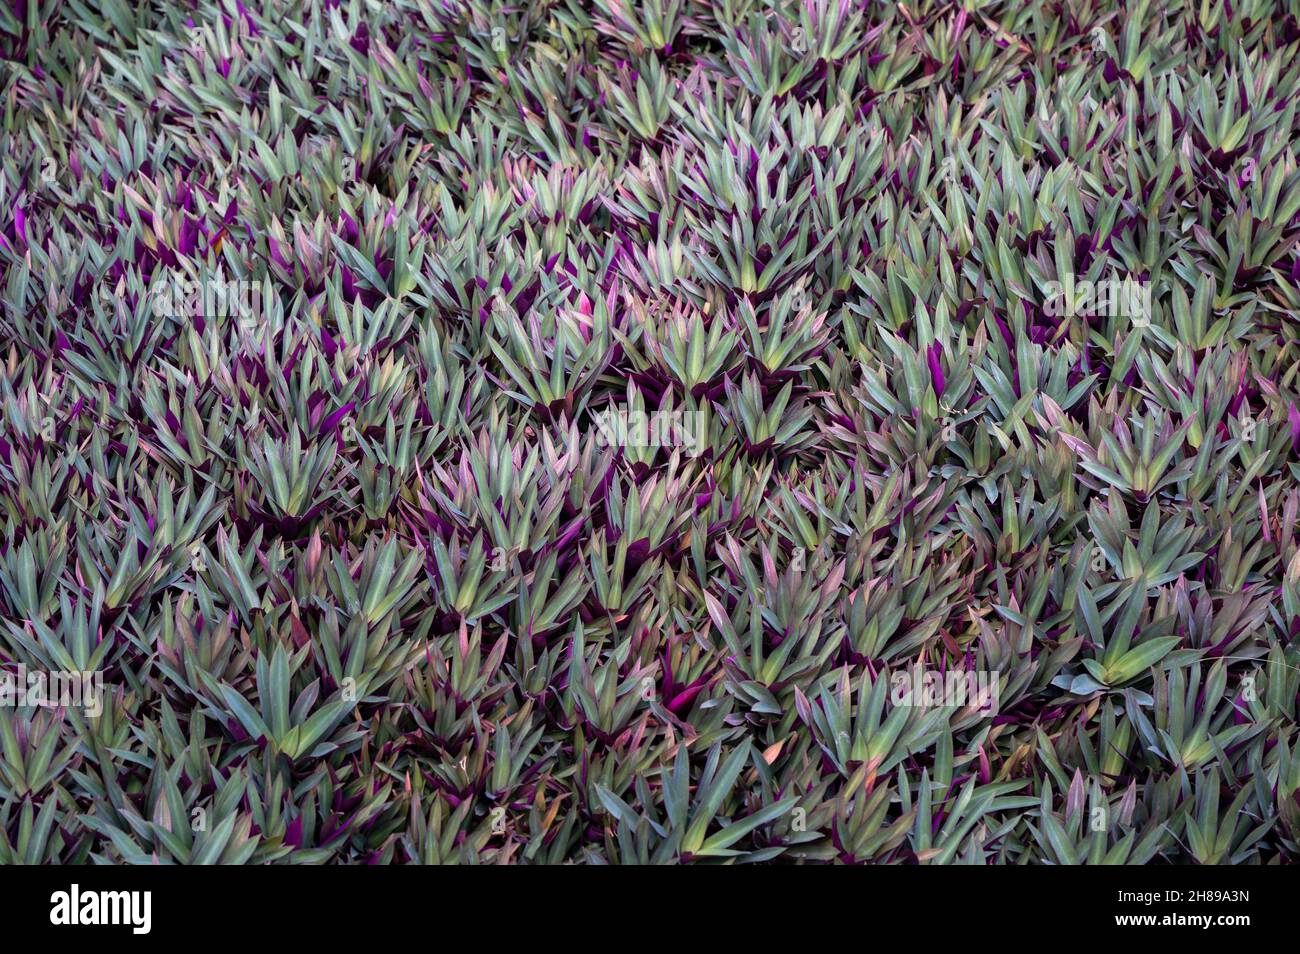 Oyster plant, Cradle plant, Clump of Moses plant sword-shaped leaves glossy green and purple Stock Photo